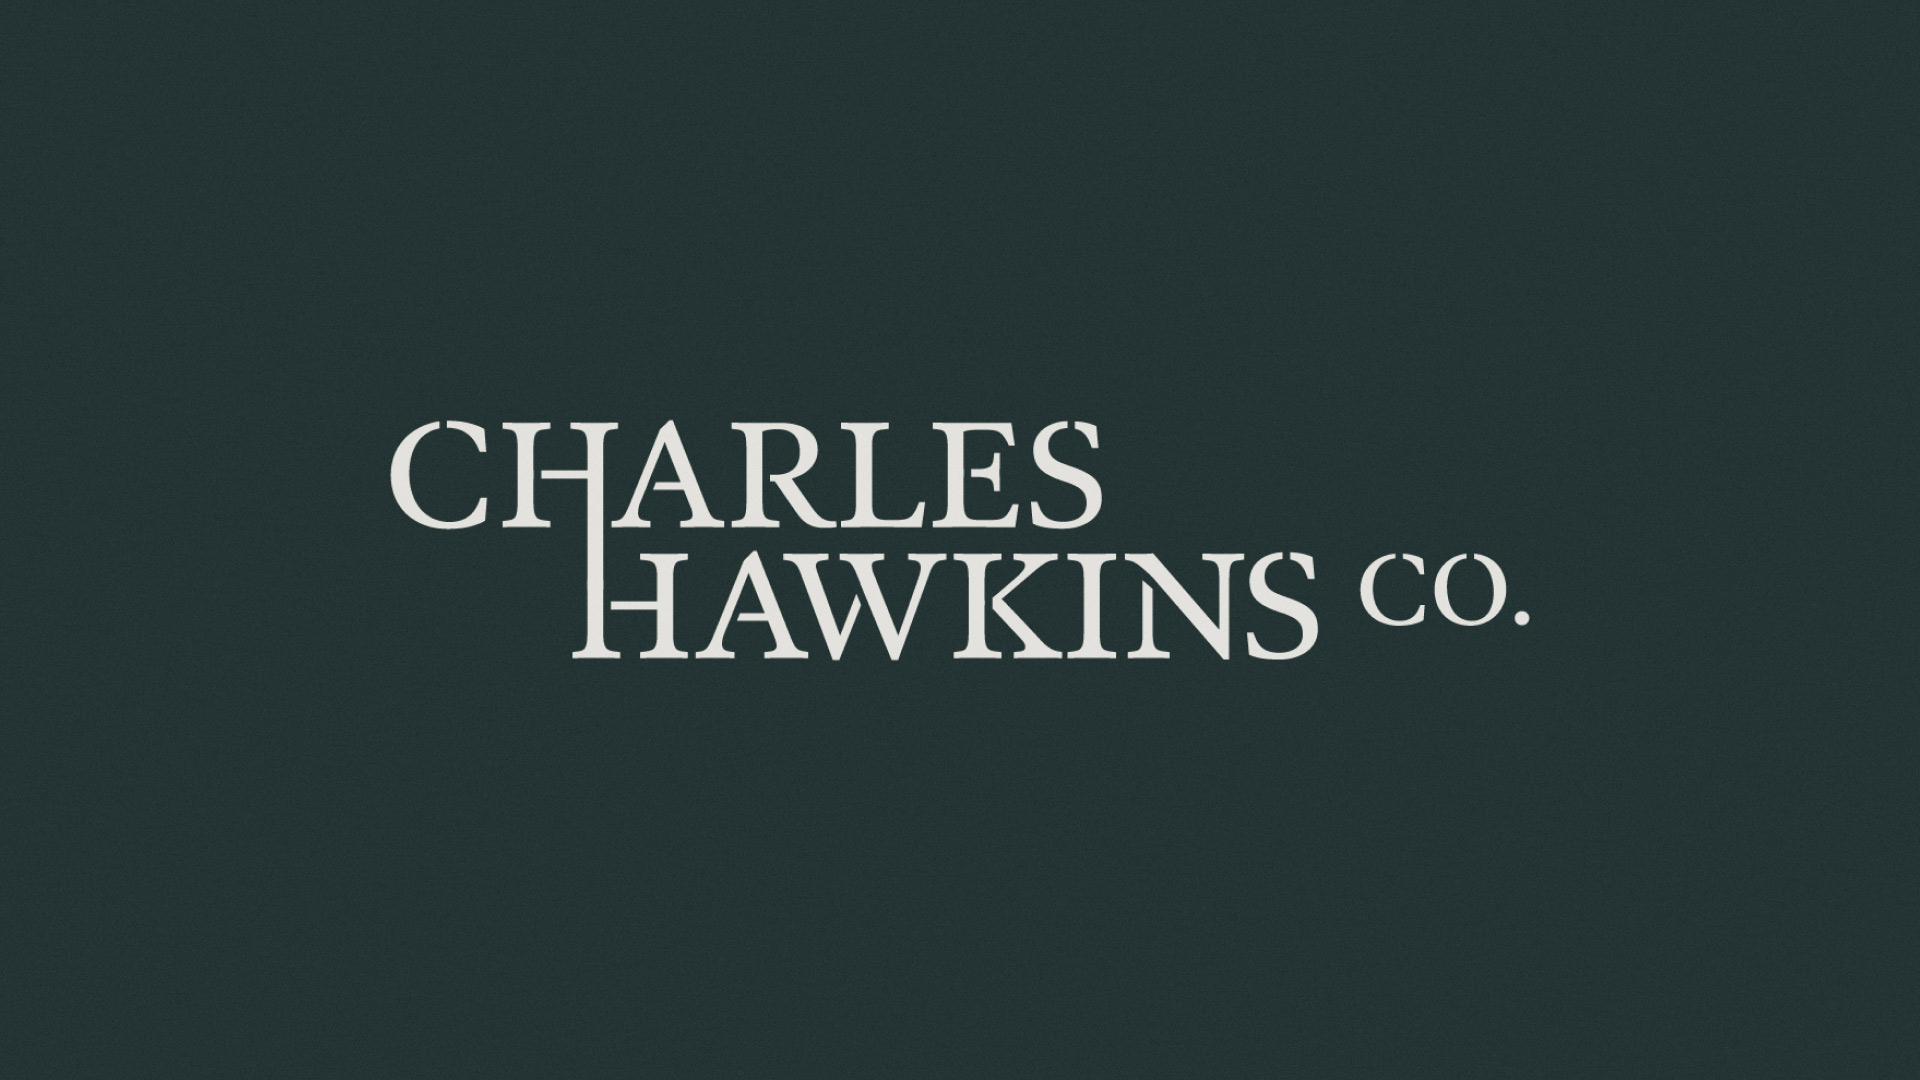 Charles Hawkins Co. logo on a dark green color background